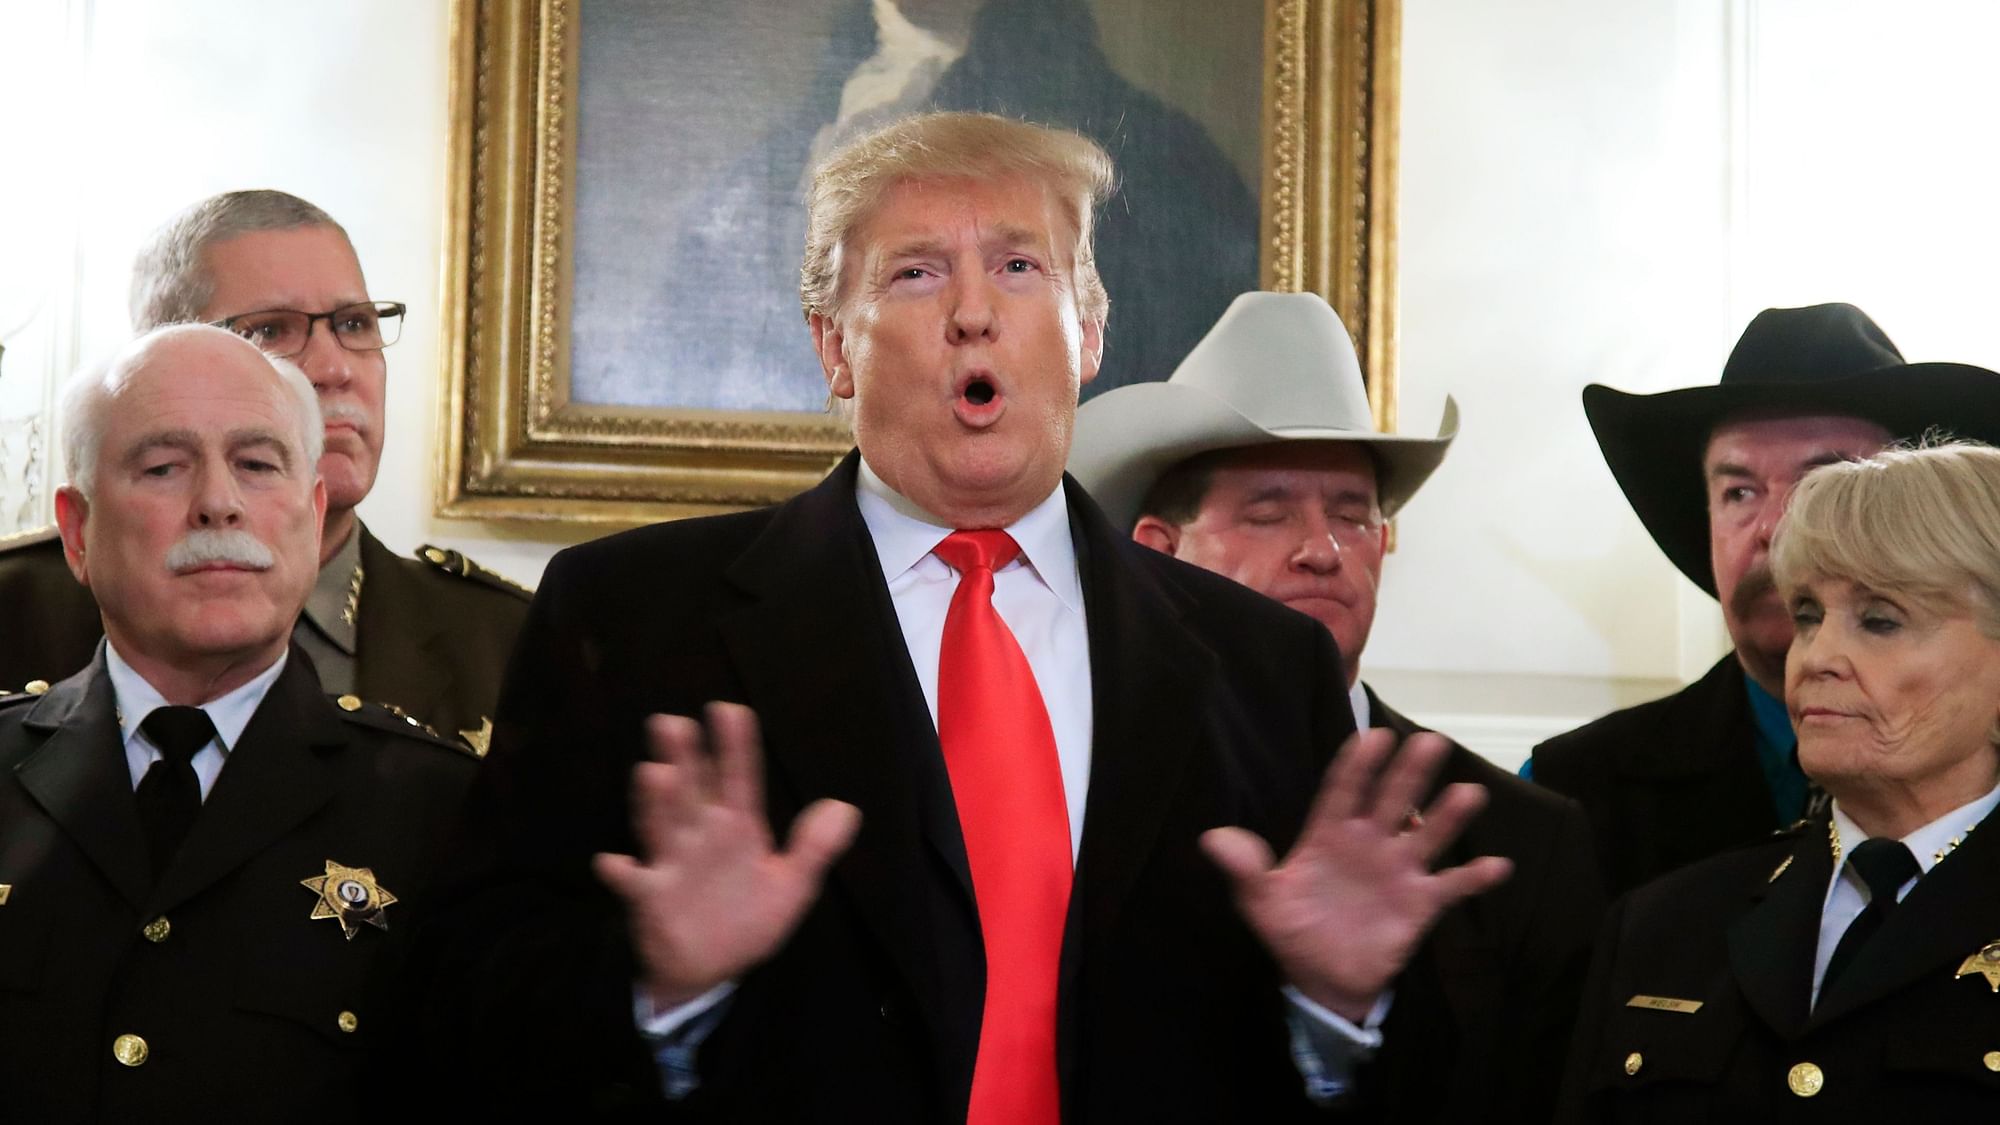 President Donald Trump speaks during a meeting with a group of sheriffs before leaving the White House in Washington, Monday, 11 February, for a trip to El Paso, Texas.